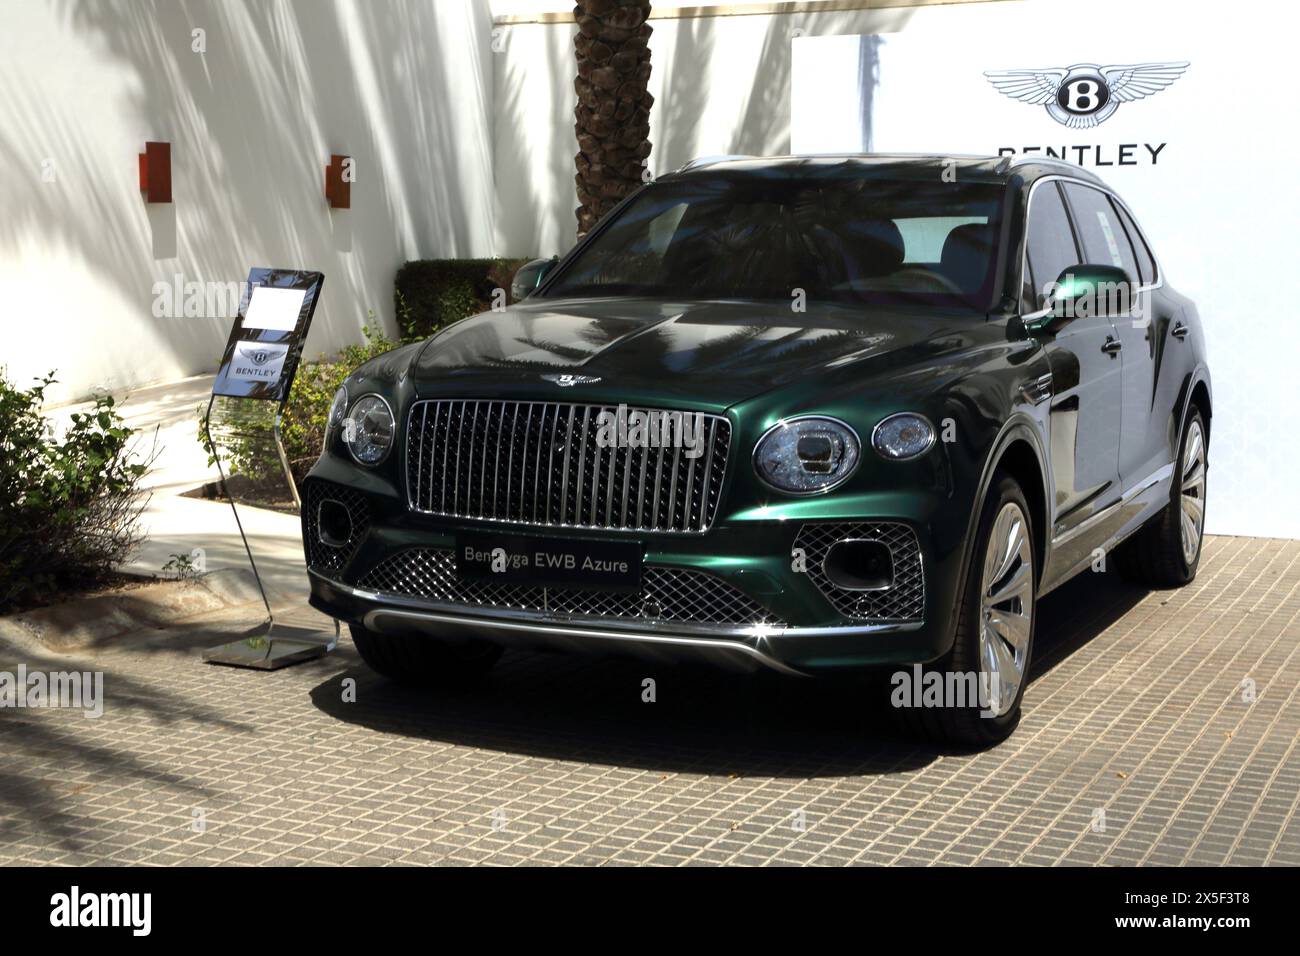 Brand New Luxury Bentley Car The Chedi Hotel Muscat Oman Stock Photo